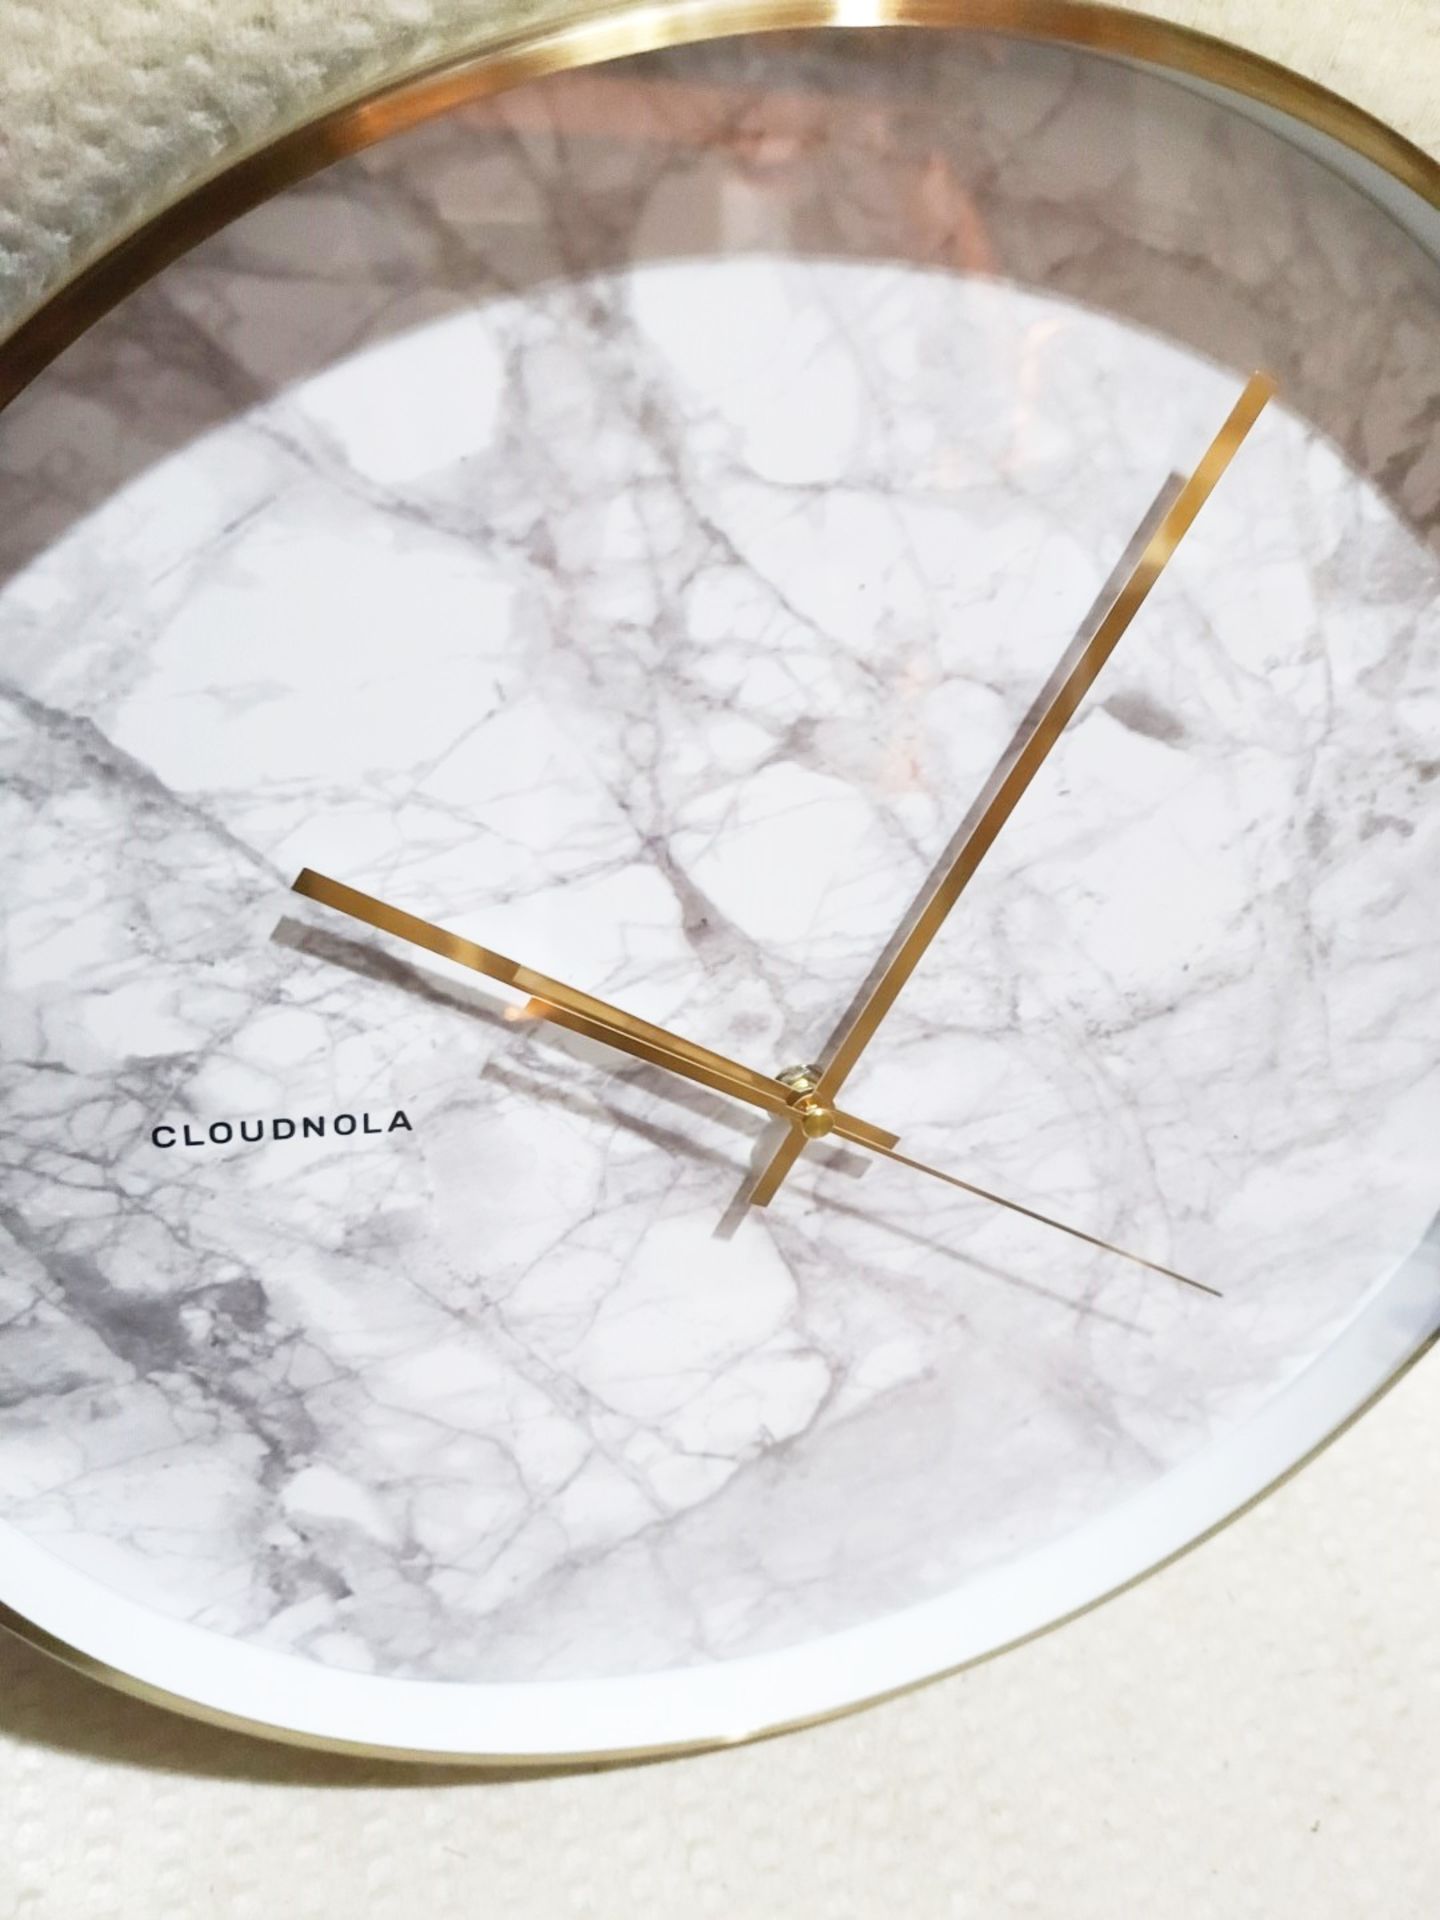 1 x CLOUDNOLA Designer Structure Marble Print Wall Clock With Polished Gold Trimmings 40cm - Boxed - Image 5 of 8